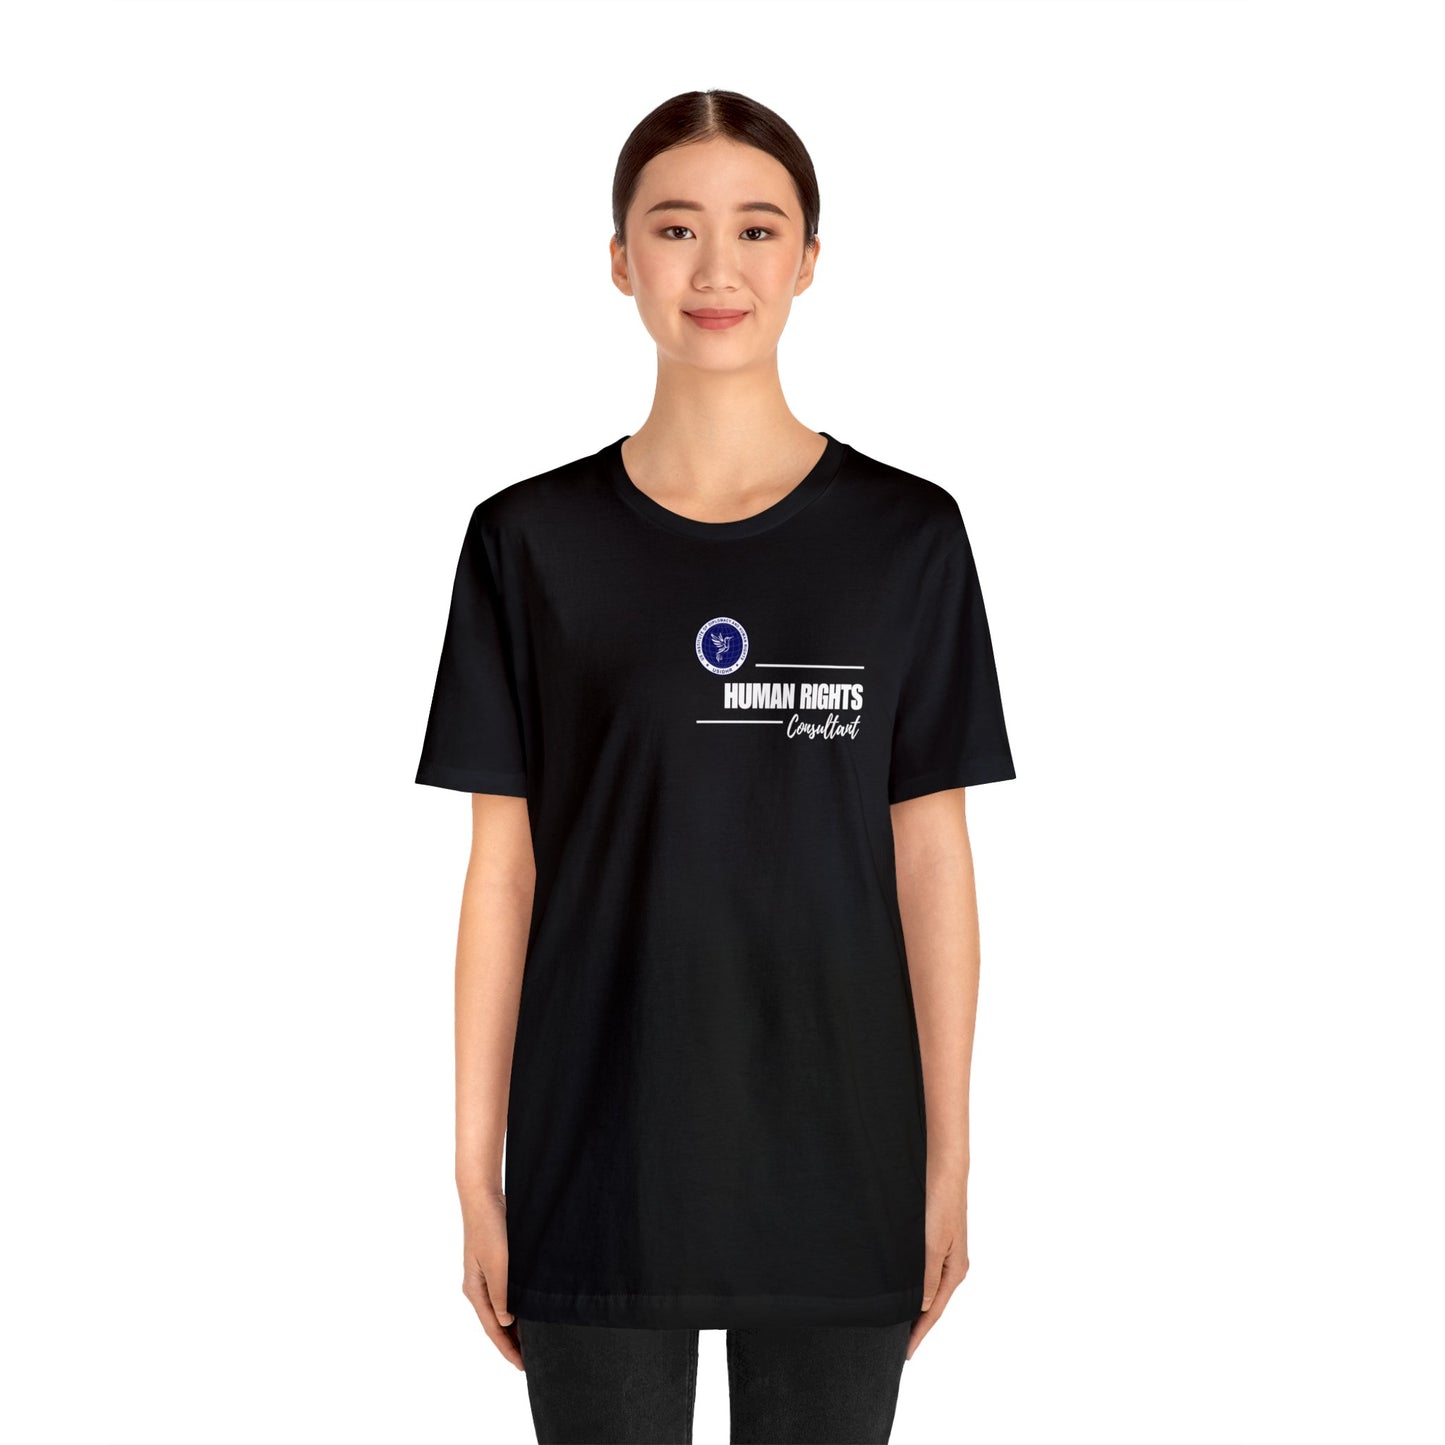 Human Rights Consultant Short Sleeve Tee